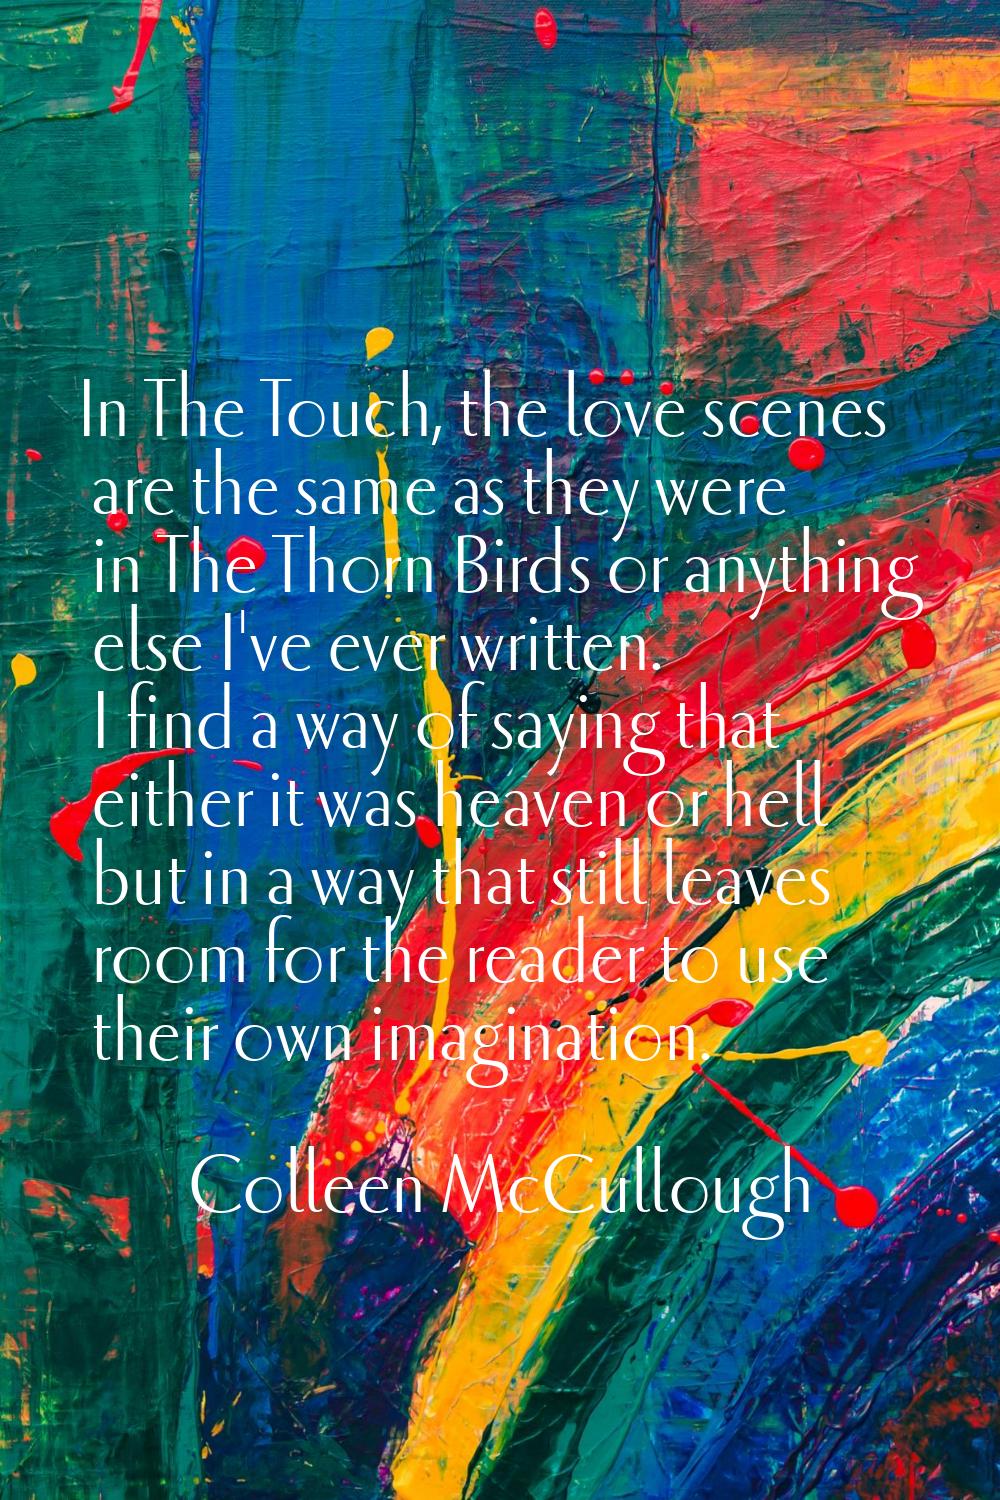 In The Touch, the love scenes are the same as they were in The Thorn Birds or anything else I've ev